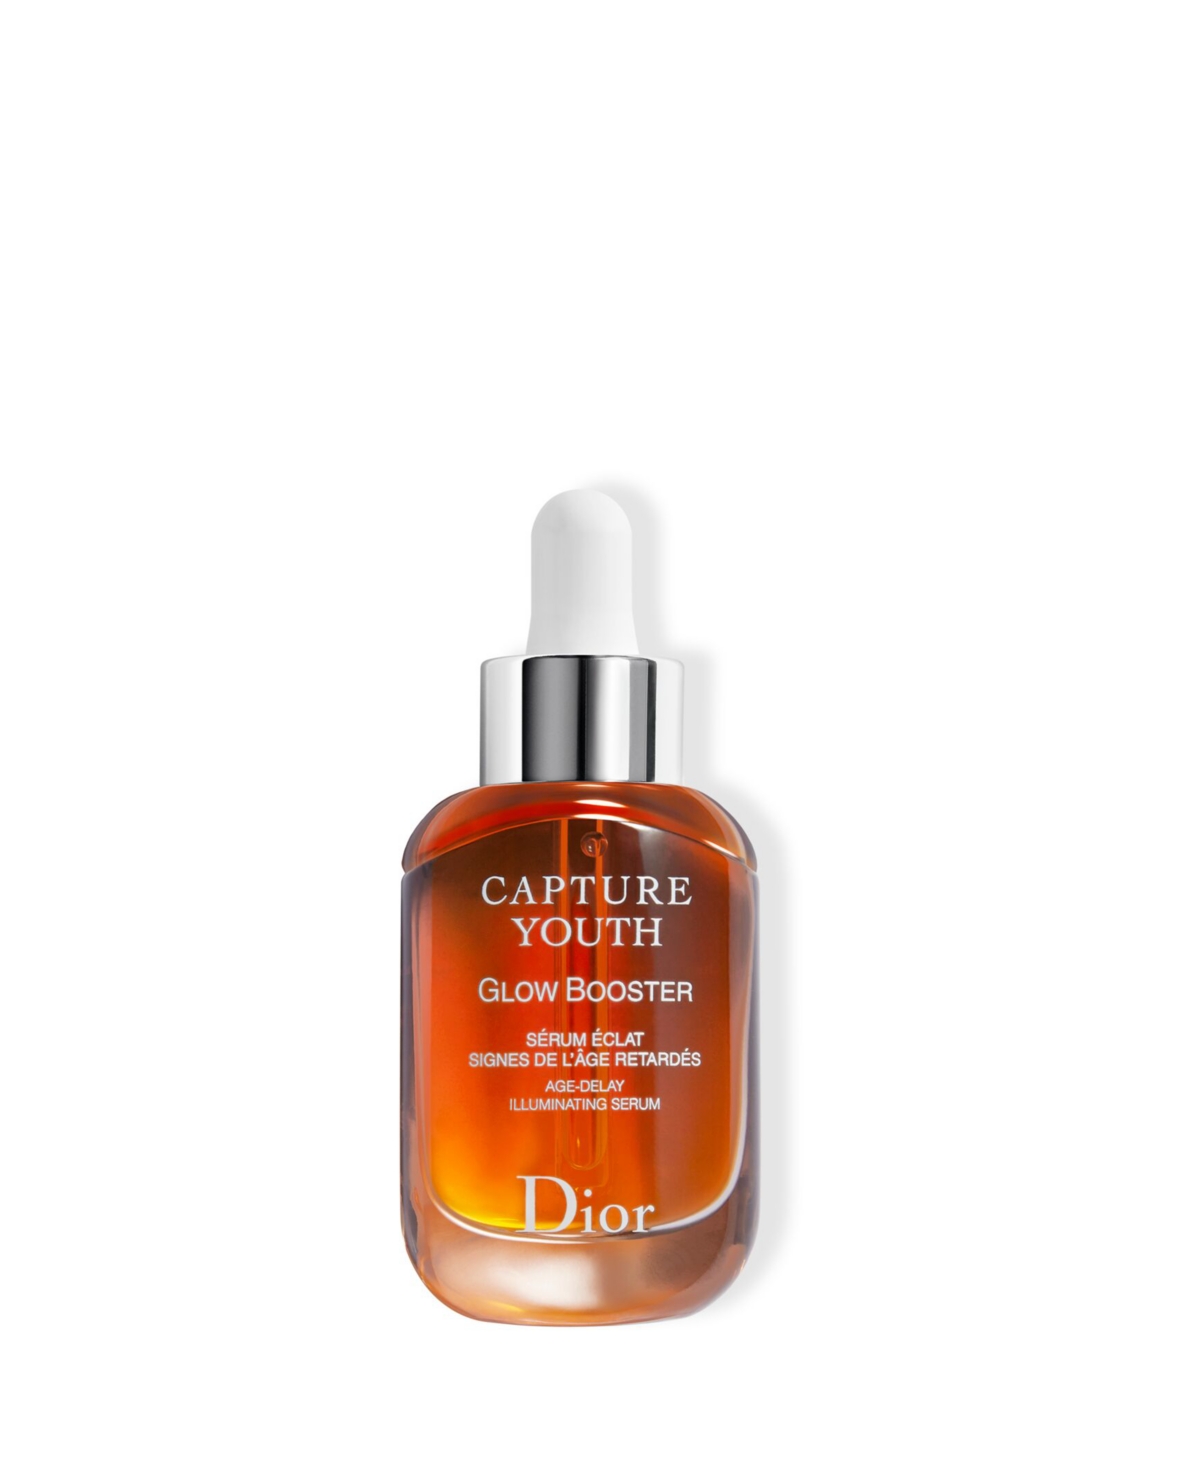 Dior Capture Youth Glow Booster Age-delay Illuminating Serum In No Color